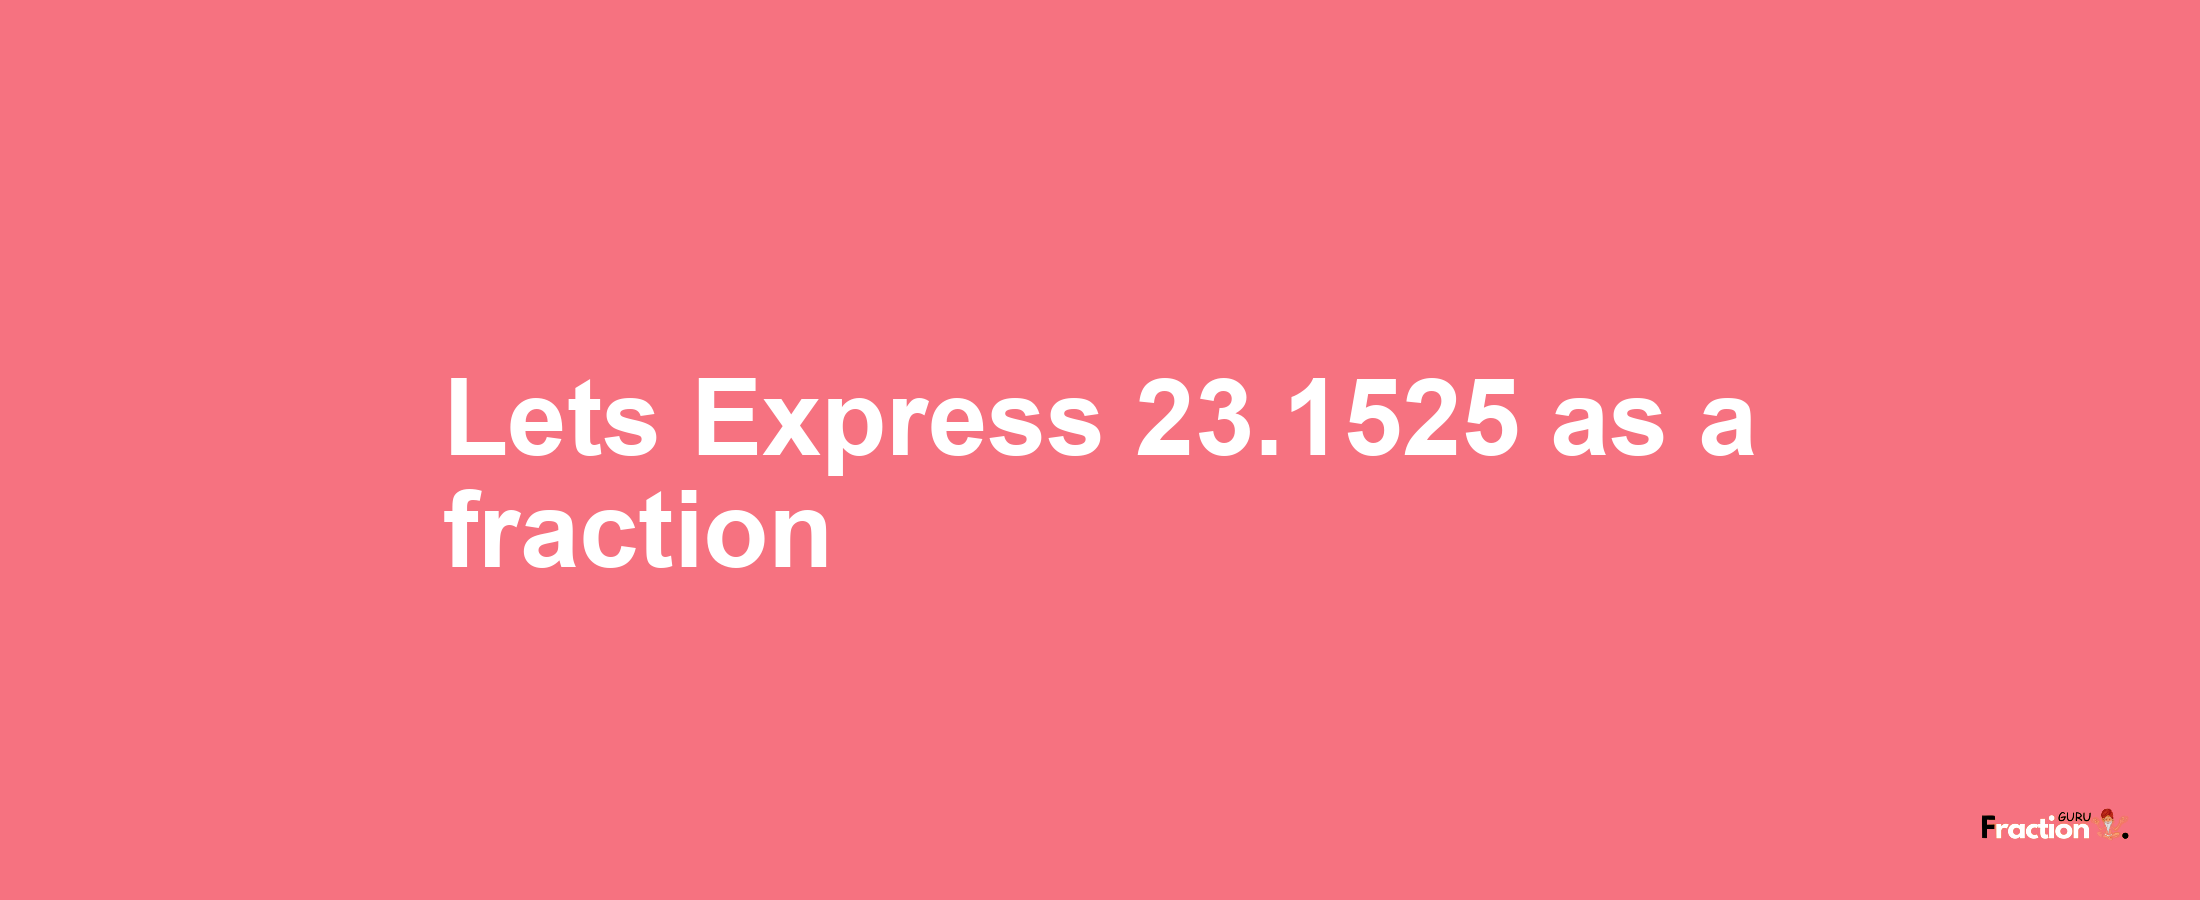 Lets Express 23.1525 as afraction